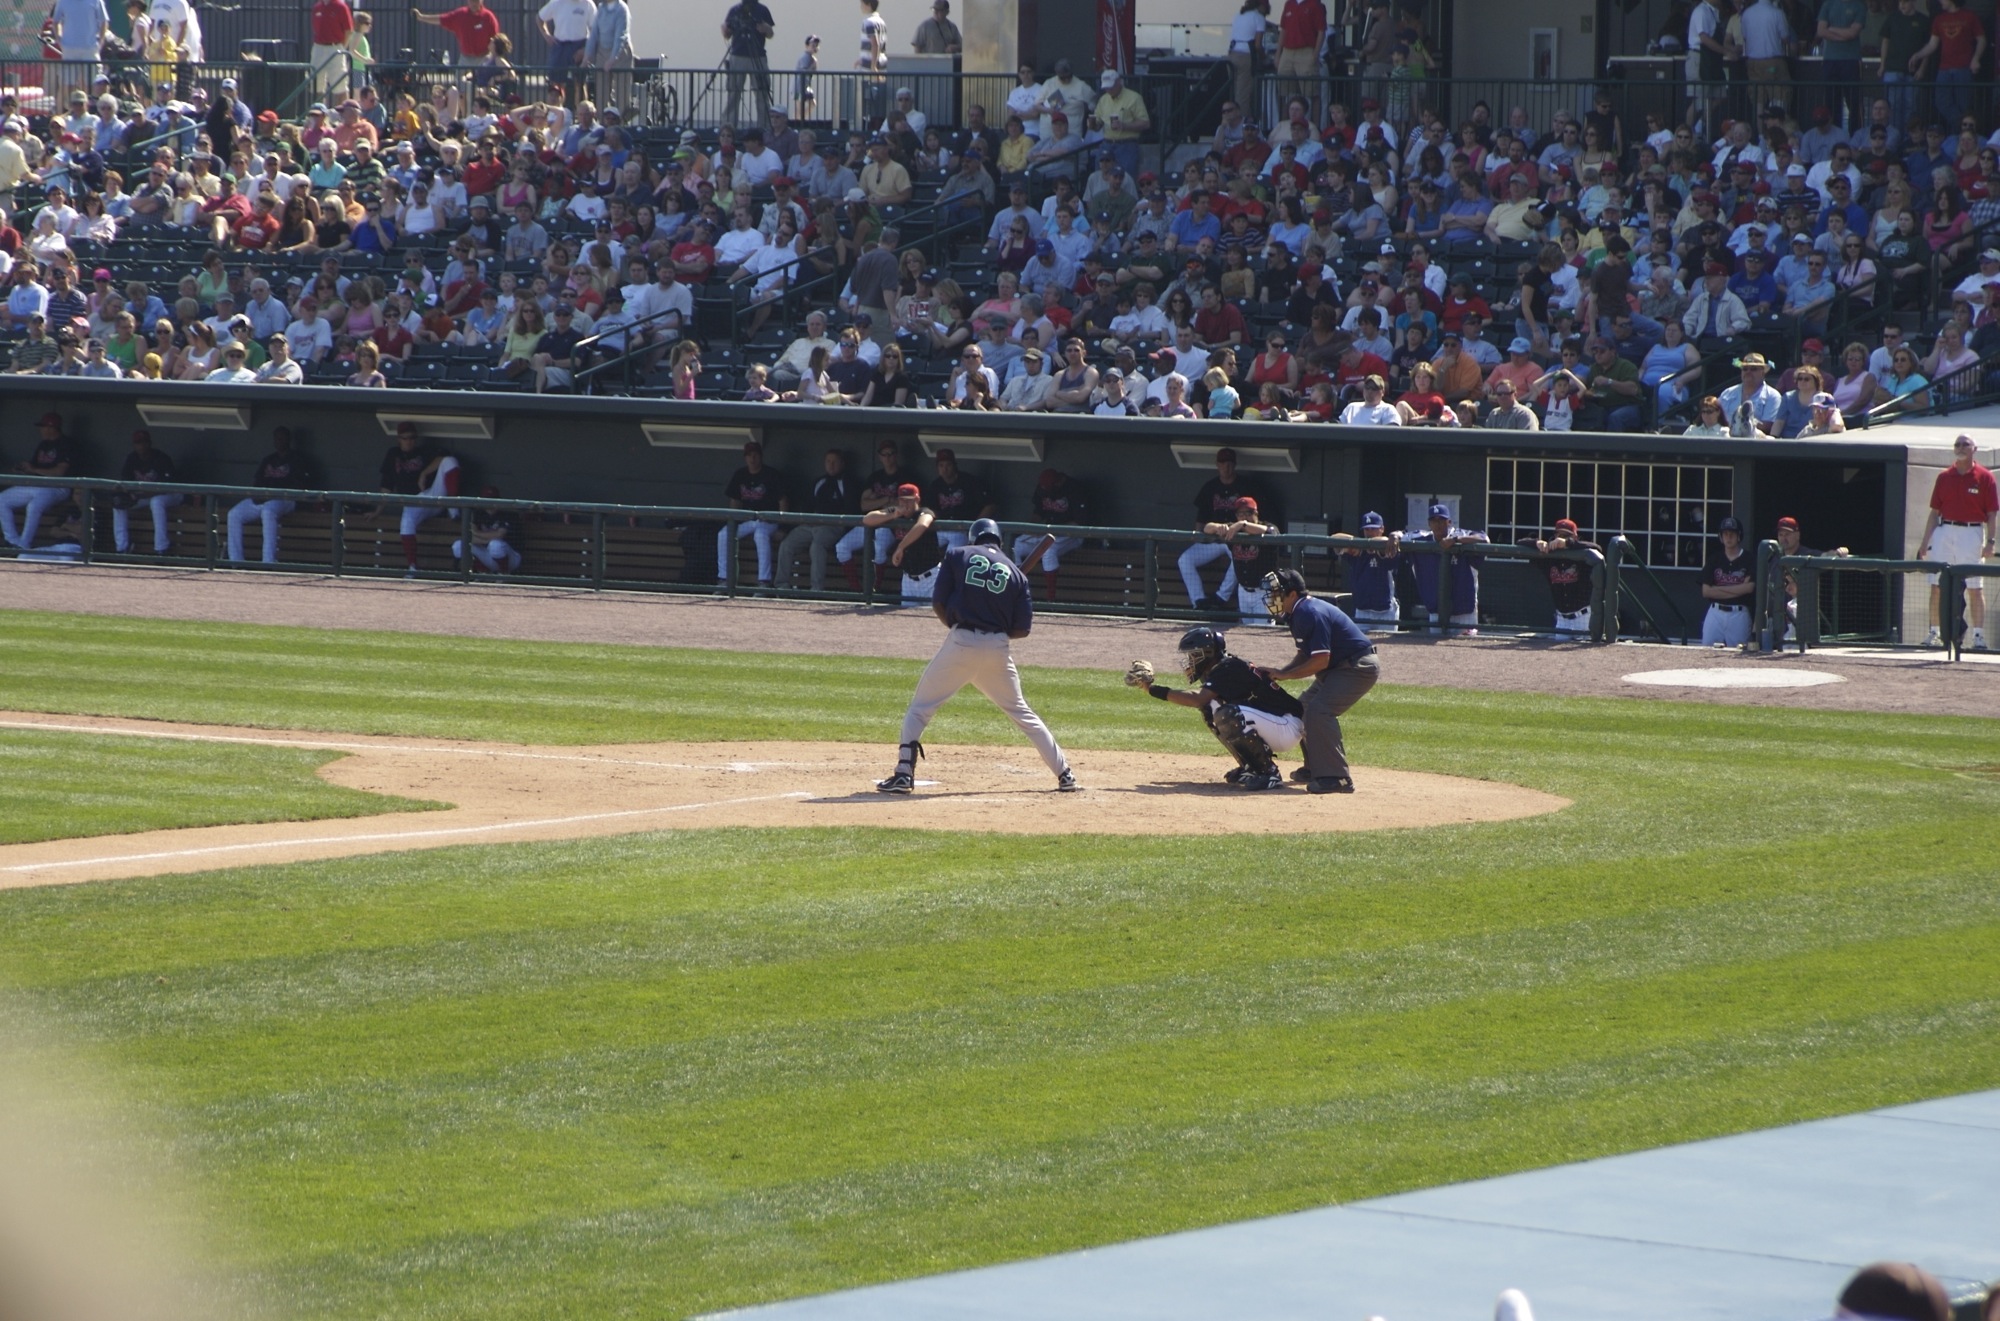 a baseball player in a black jersey is at bat